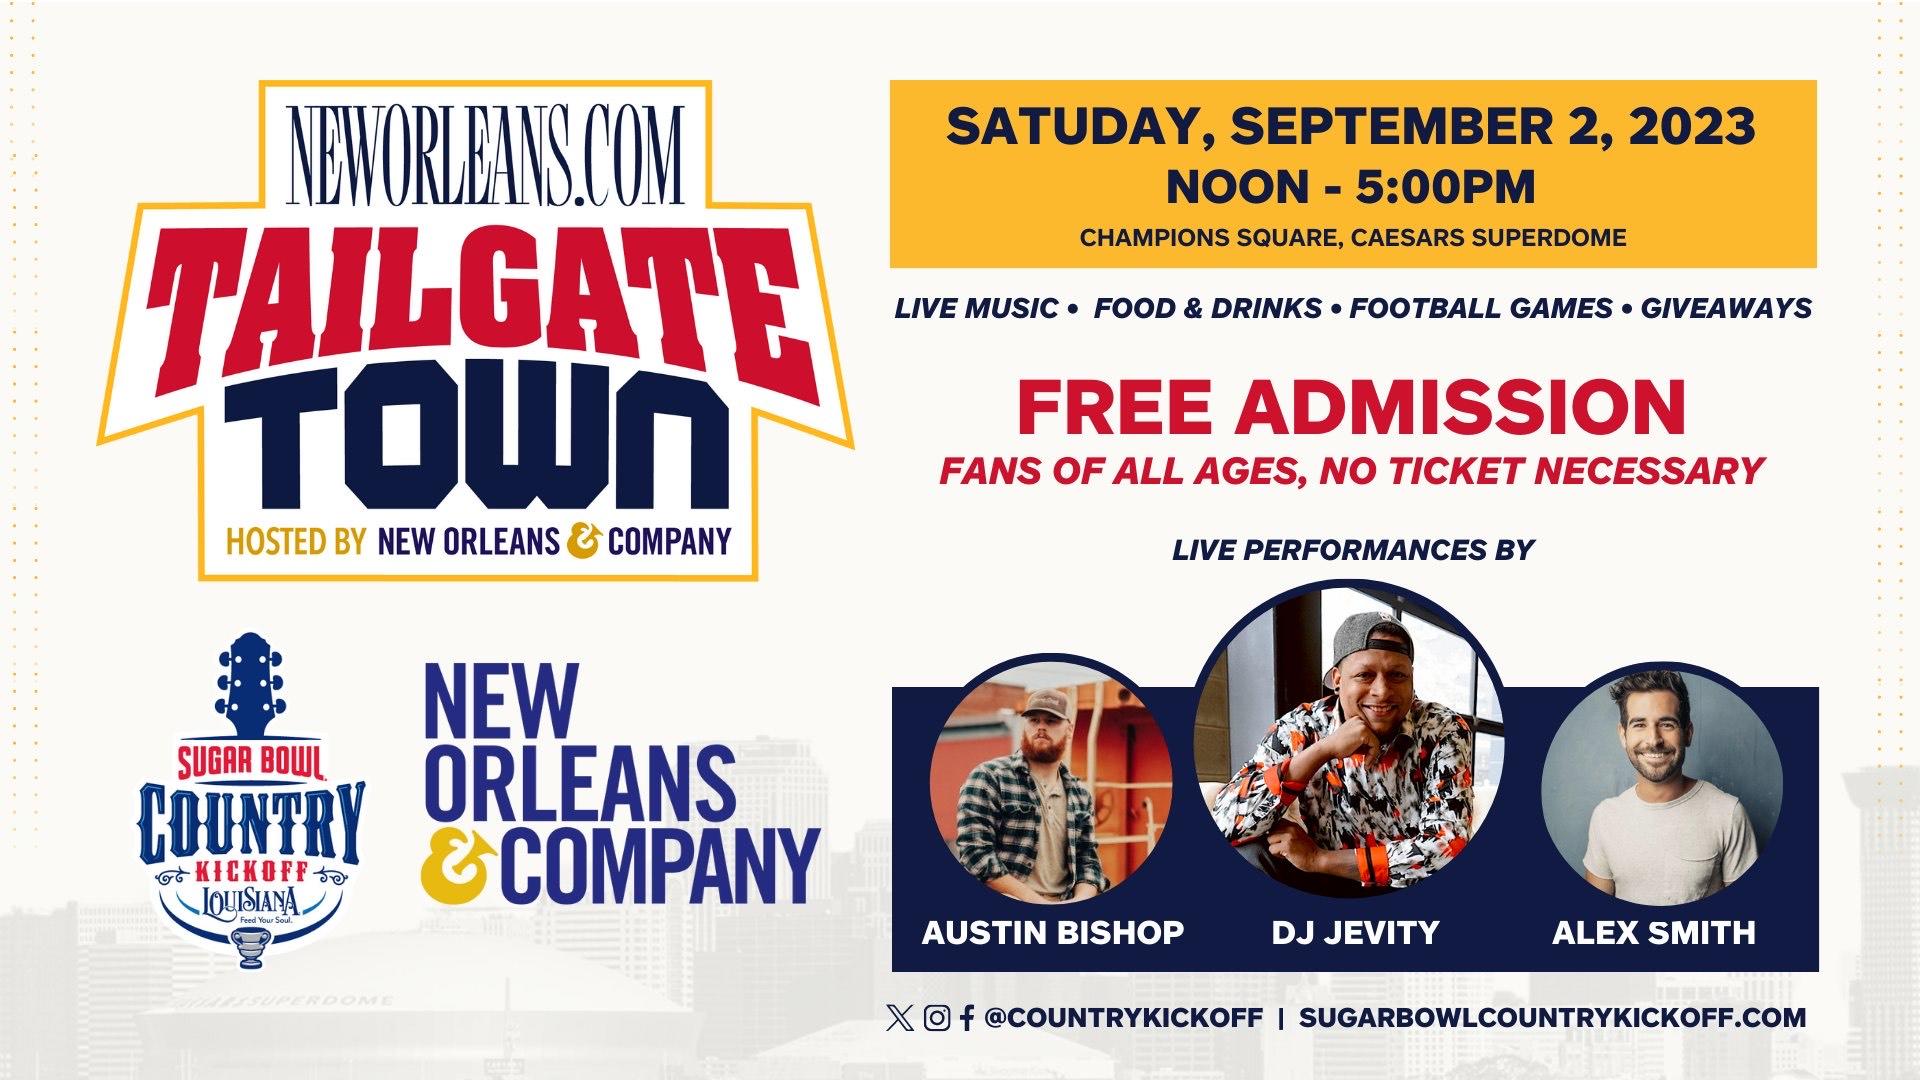 Sugarbowl Country Kickoff Tailgate Town